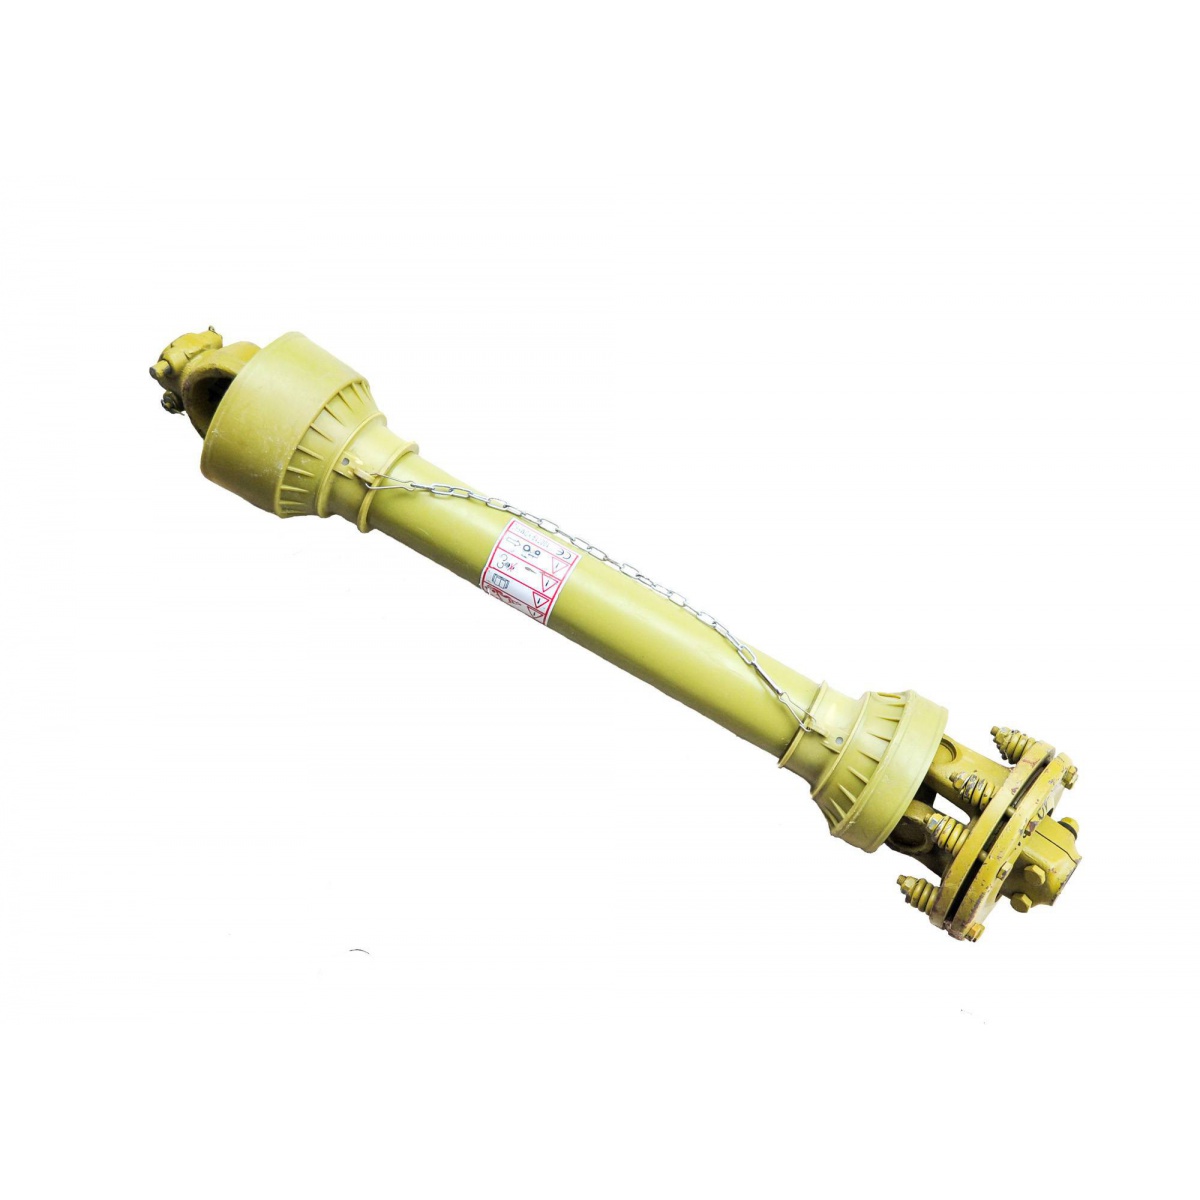 PTO shaft with clutch 07B - 110 cm / up to 105 HP